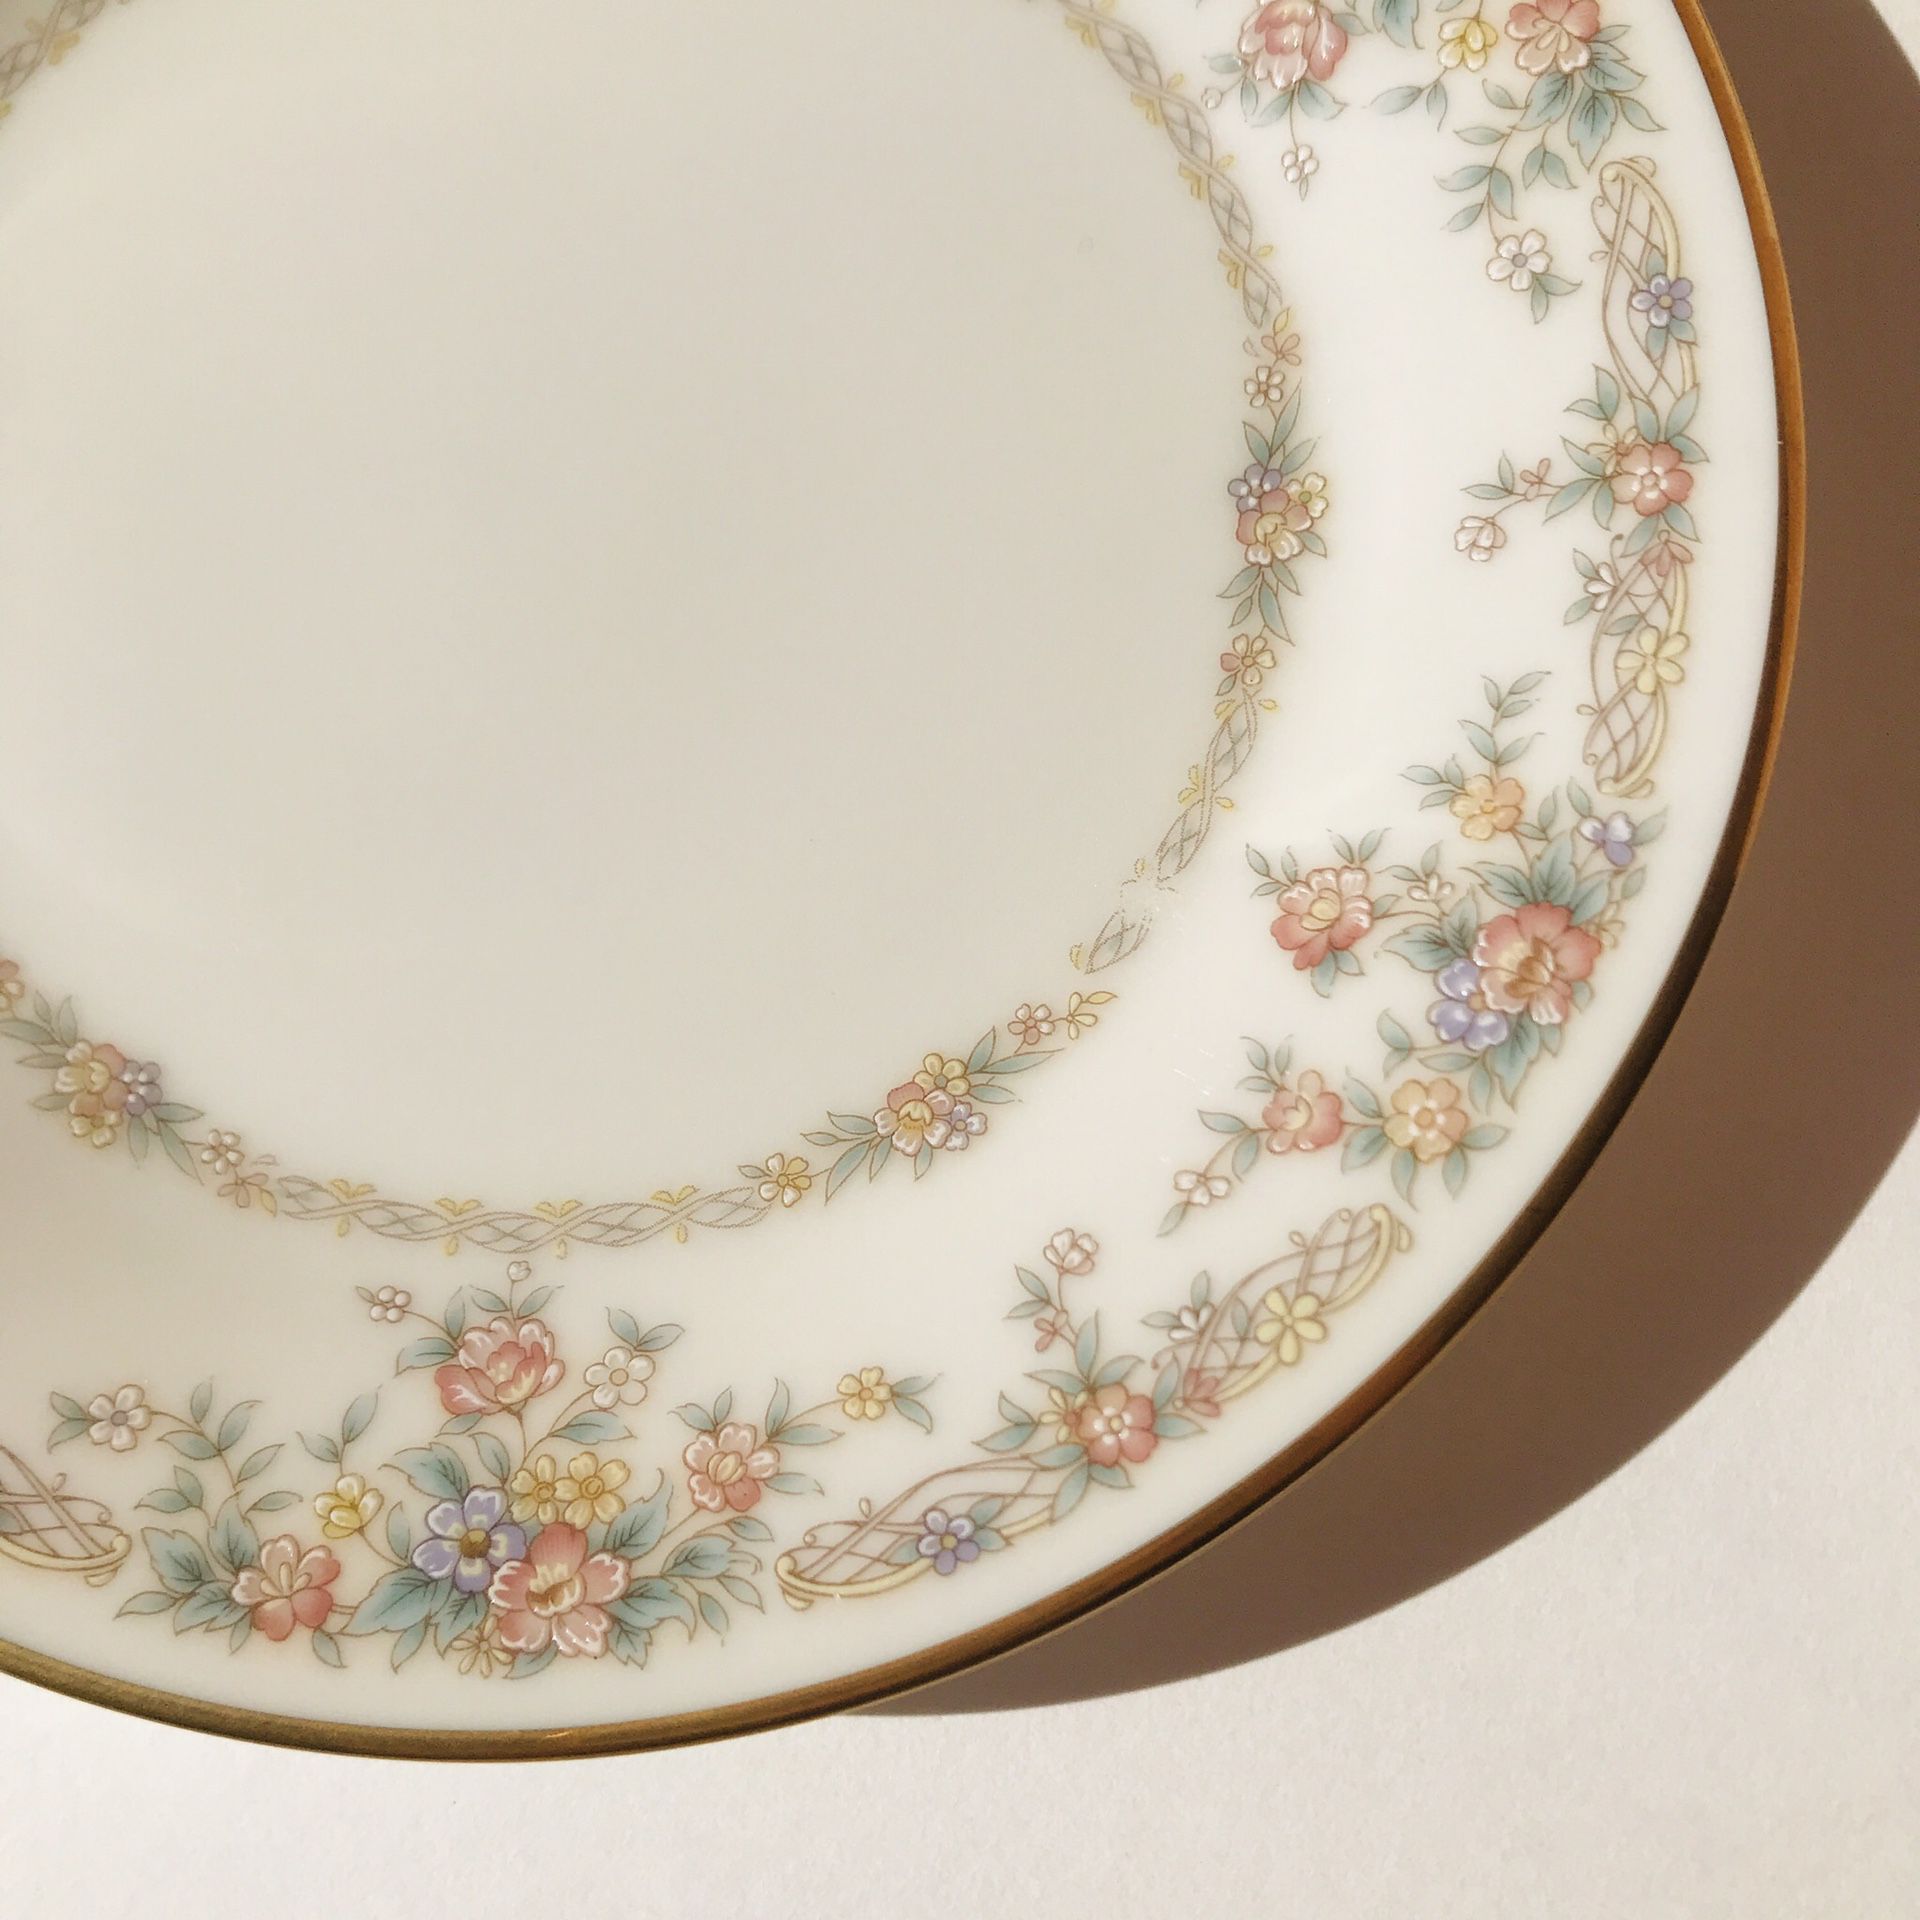 Set of 4 - Noritake Ivory China 7246 Bread and Butter Place